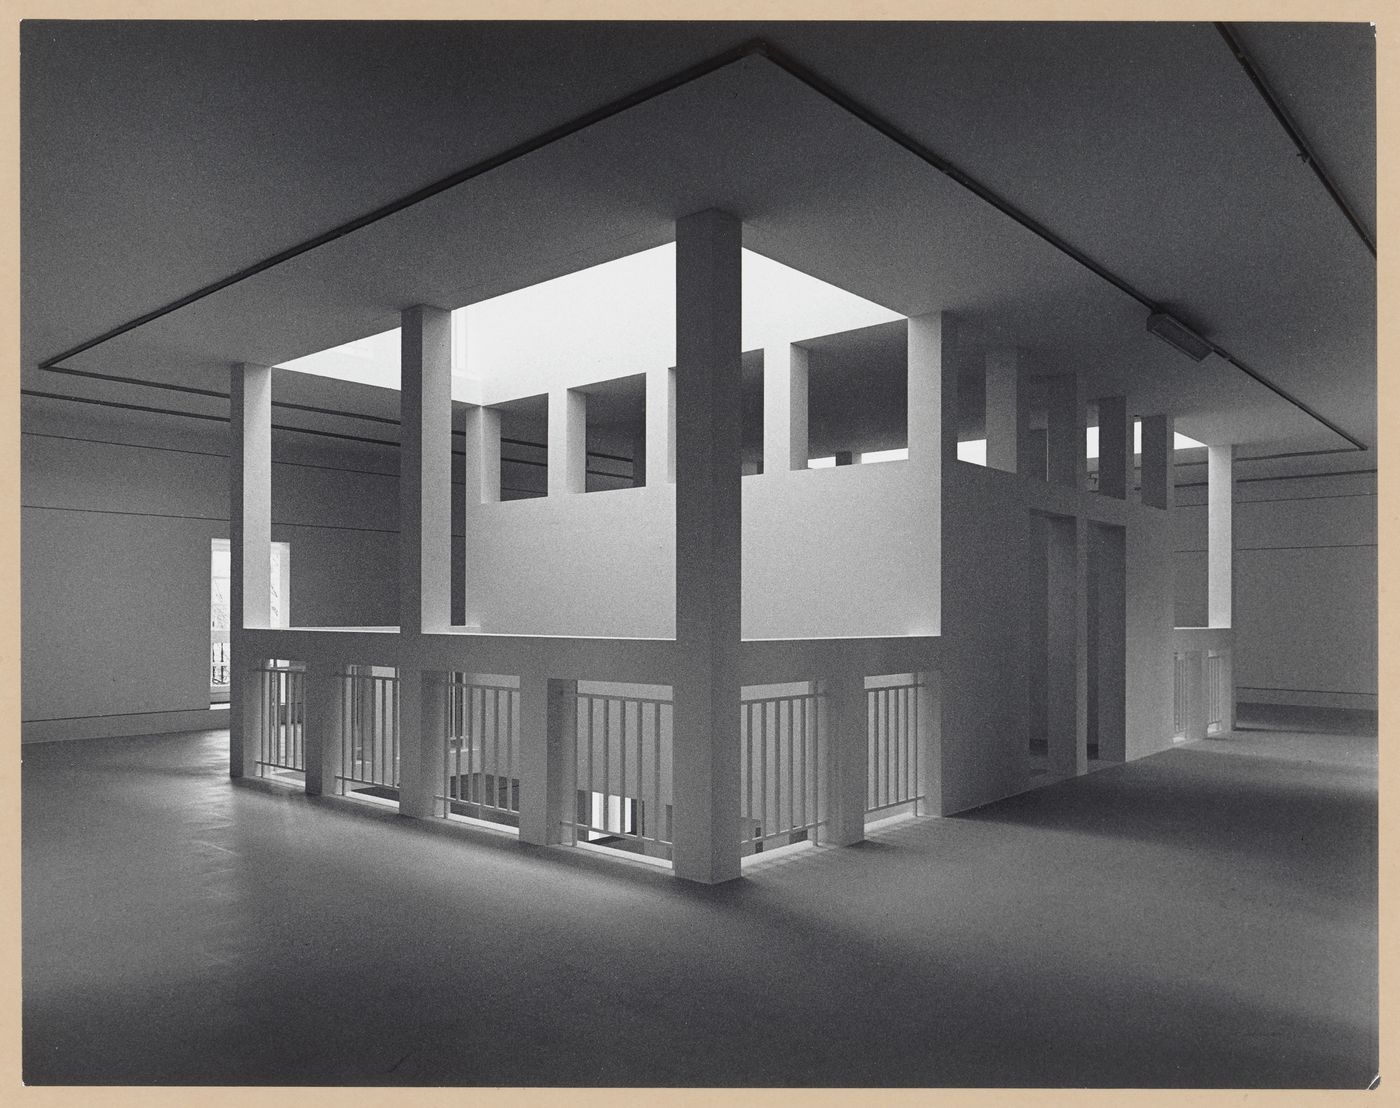 Interior view of the Deutsches Architekturmuseum [German Architecture Museum] showing the principal and lateral façades of the second storey of the House-in-House, light wells and exhibition areas, Schaumainkai 43, Frankfurt am Main, Germany